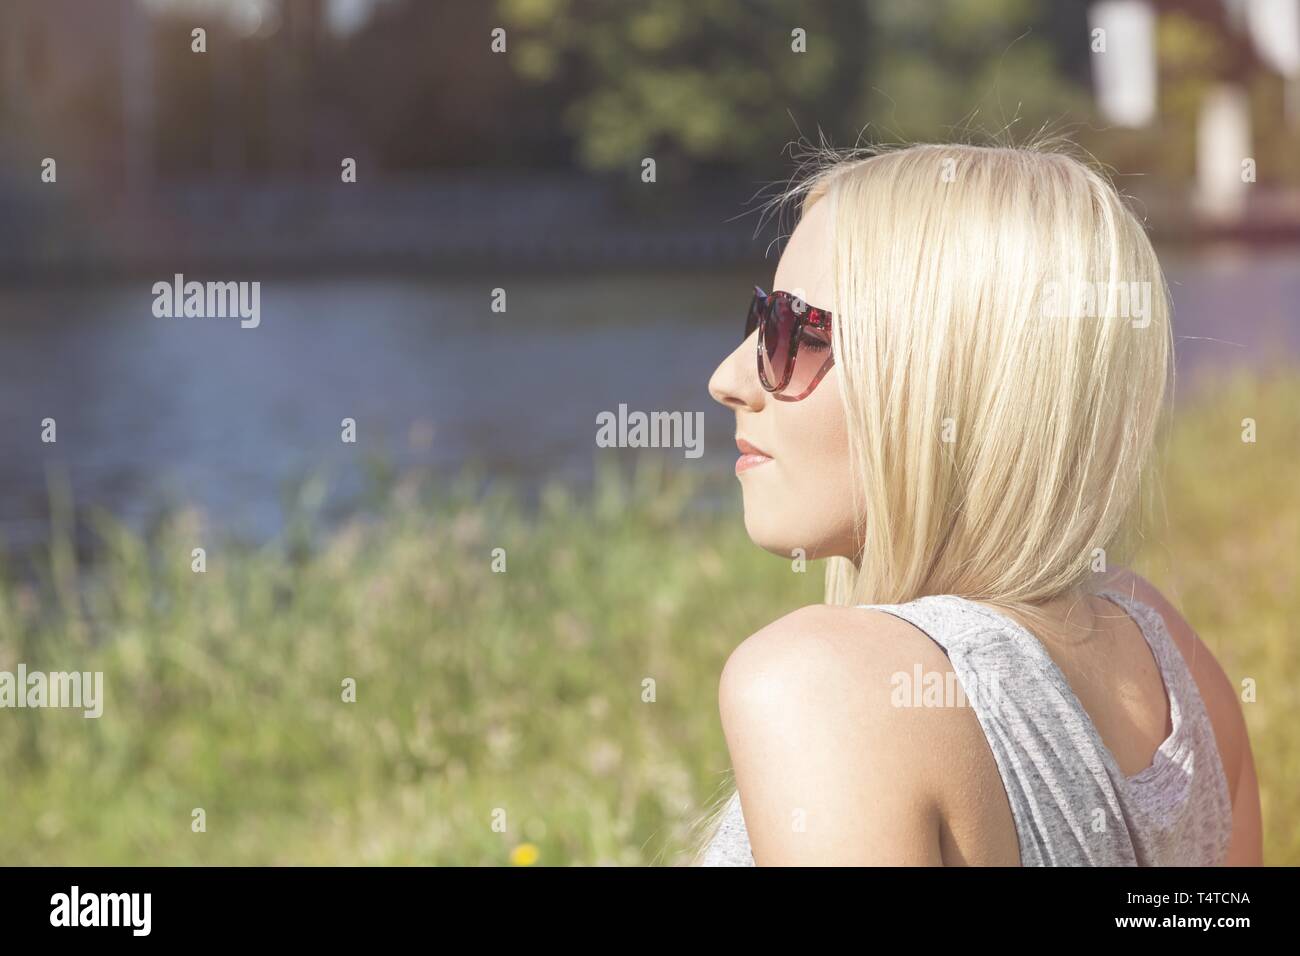 Teen with sun glasses Stock Photo